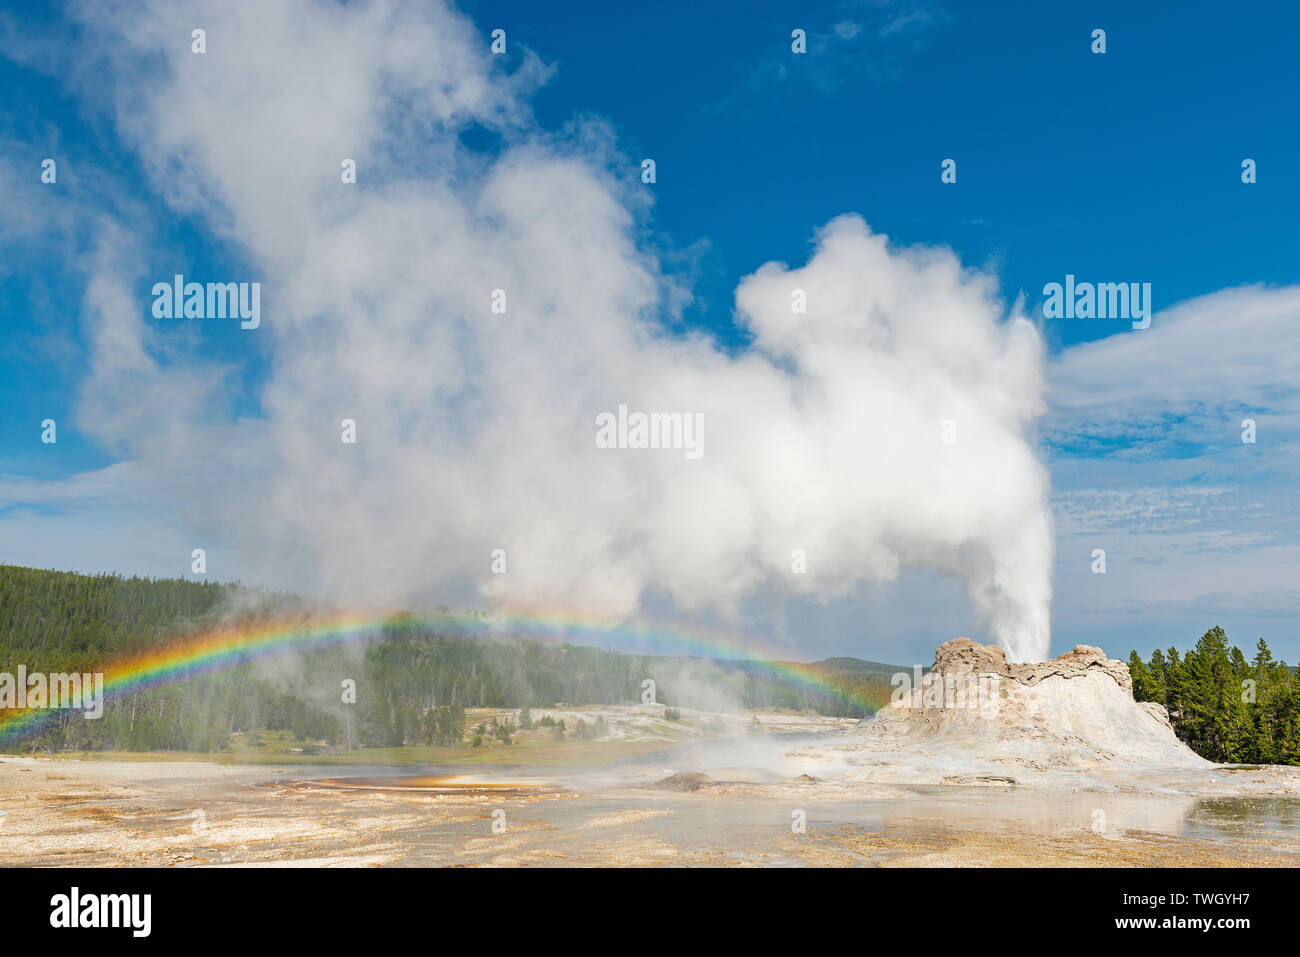 Castle Geyser with eruption and a rainbow in the Upper Geyser Basin, Yellowstone national park, Wyoming, United States of America, USA. Stock Photo